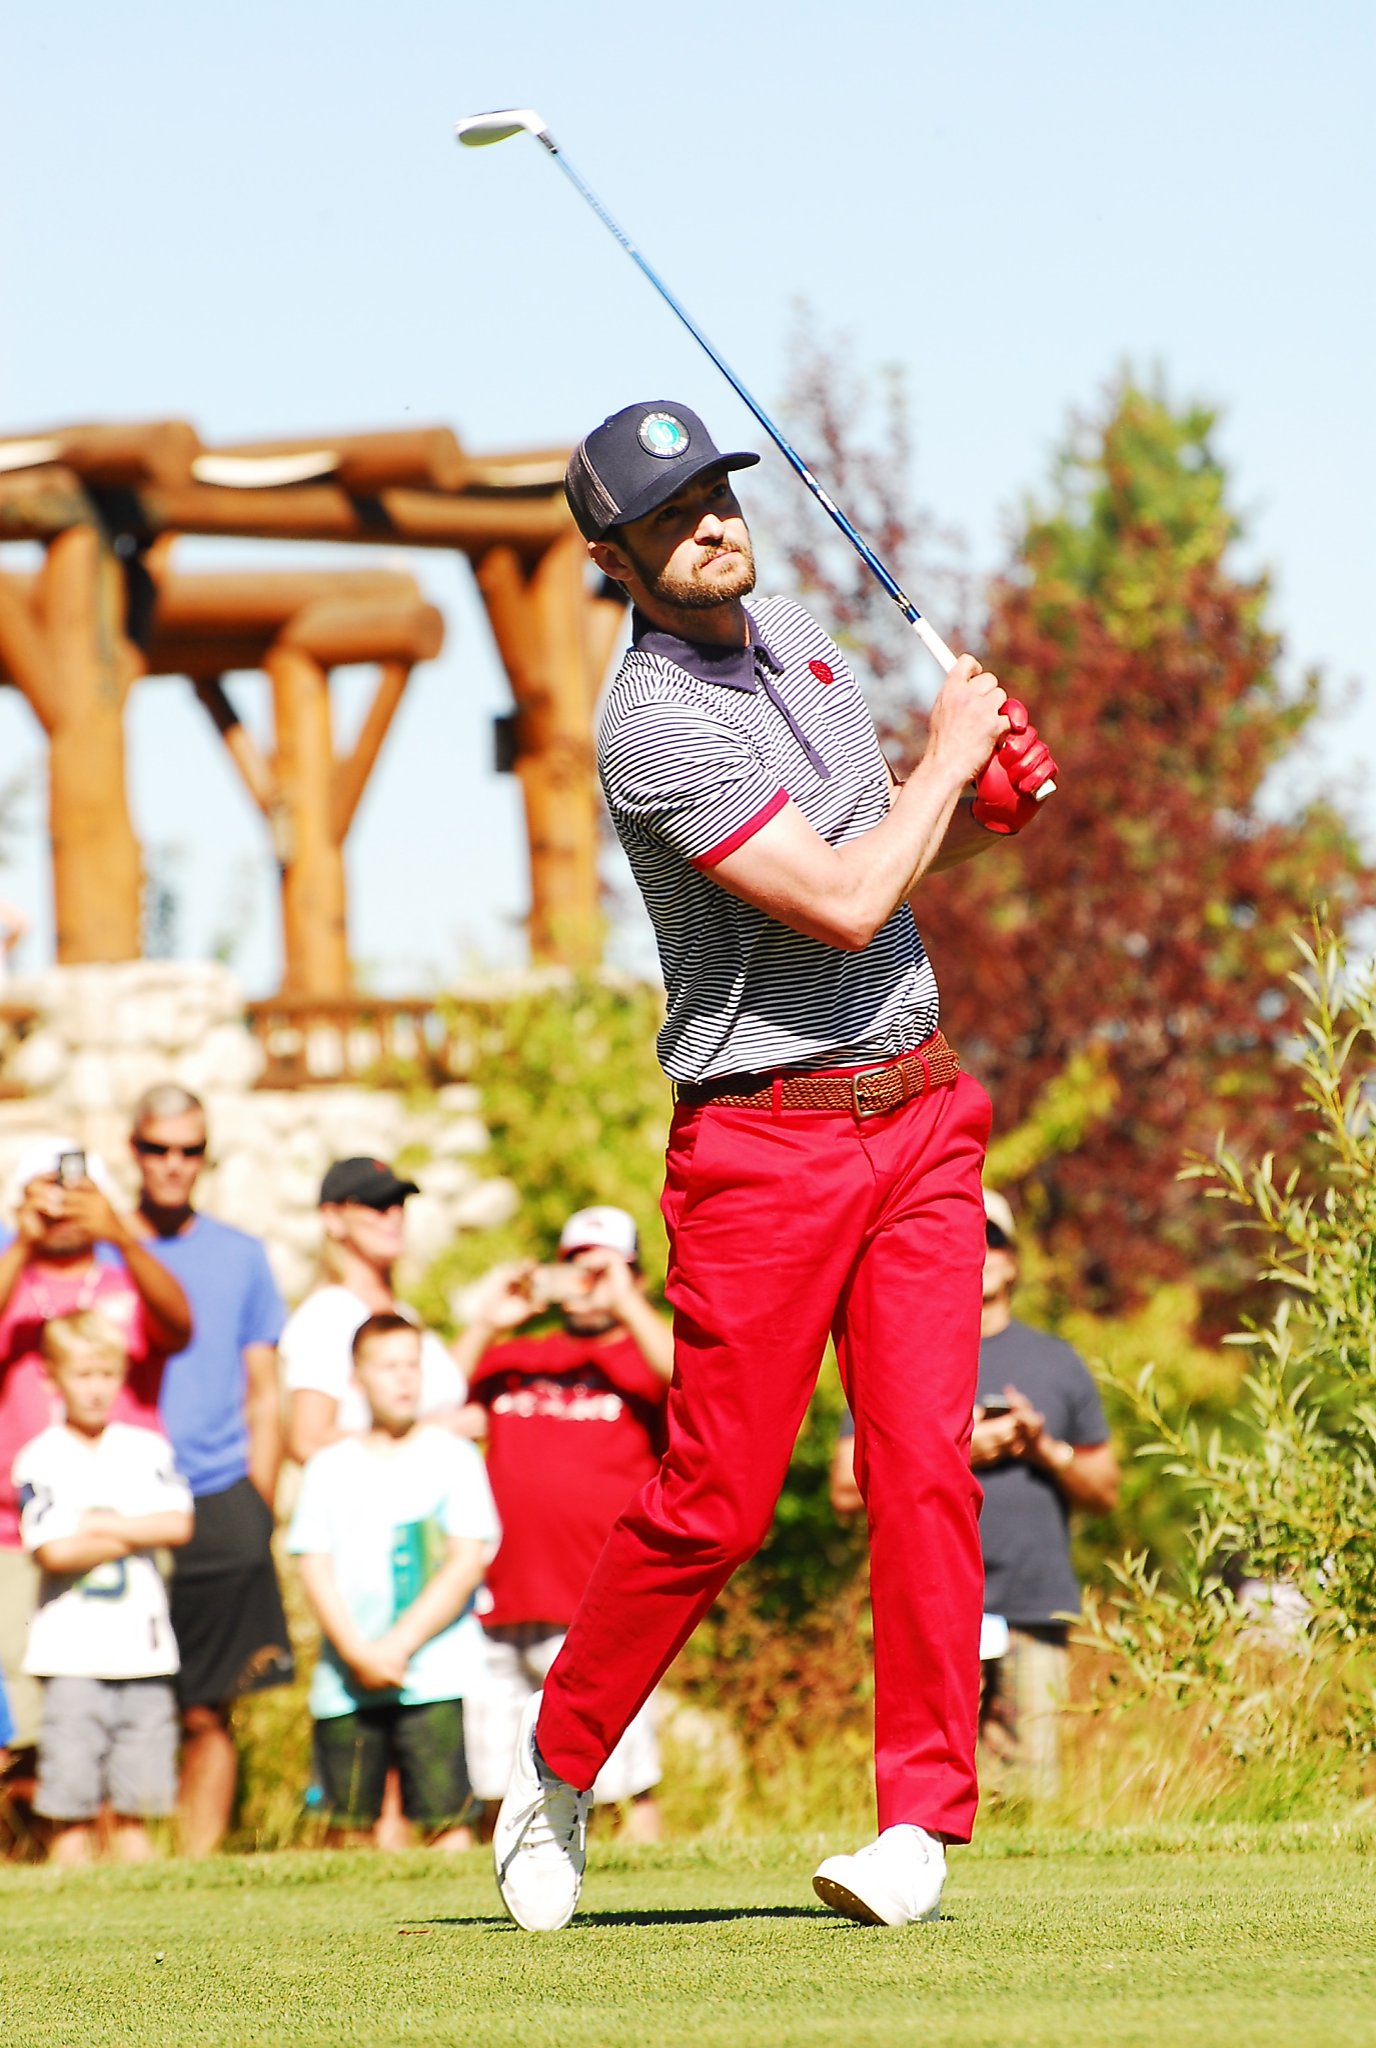 Curry, Timberlake team up, electrify Tahoe celebrity golf tourney image